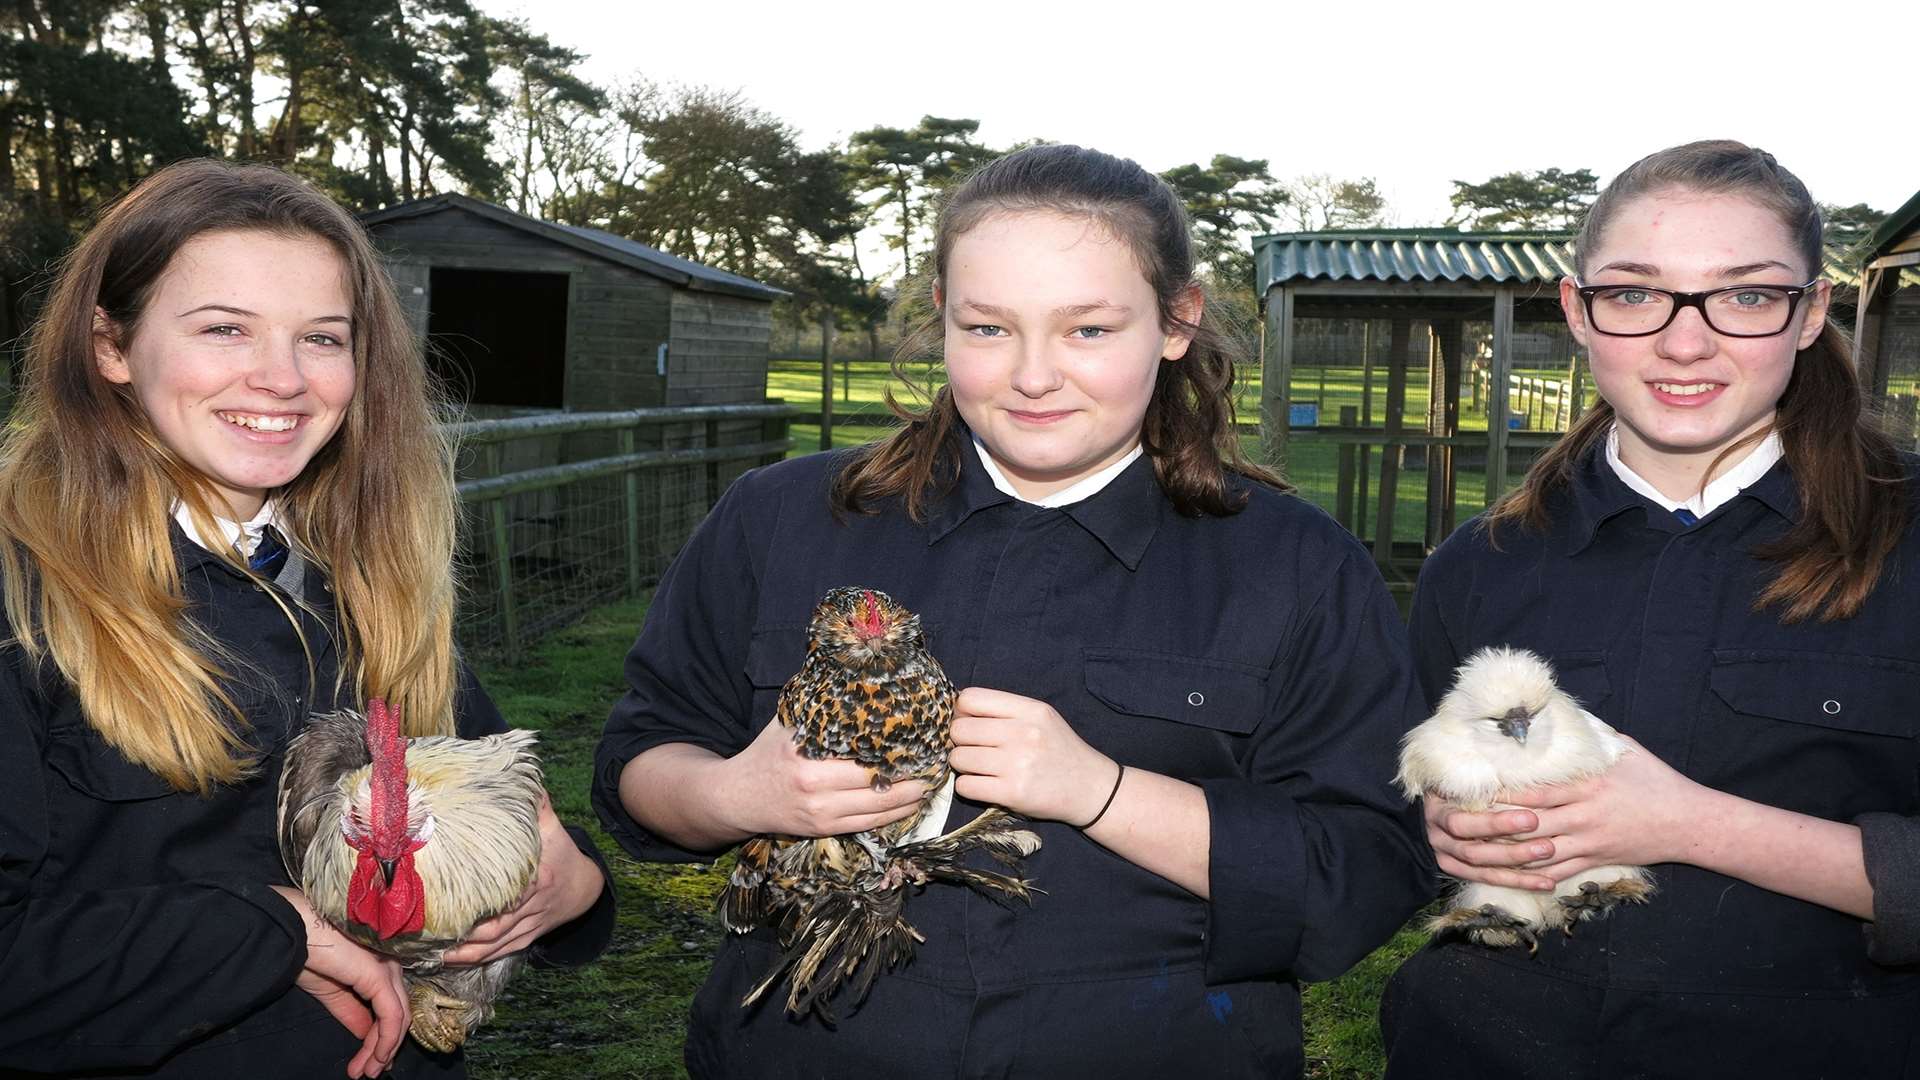 Holly Fuller, Kayleigh Lancaster, Josie Rollings with bantams at the New Line Learning Acacdemy